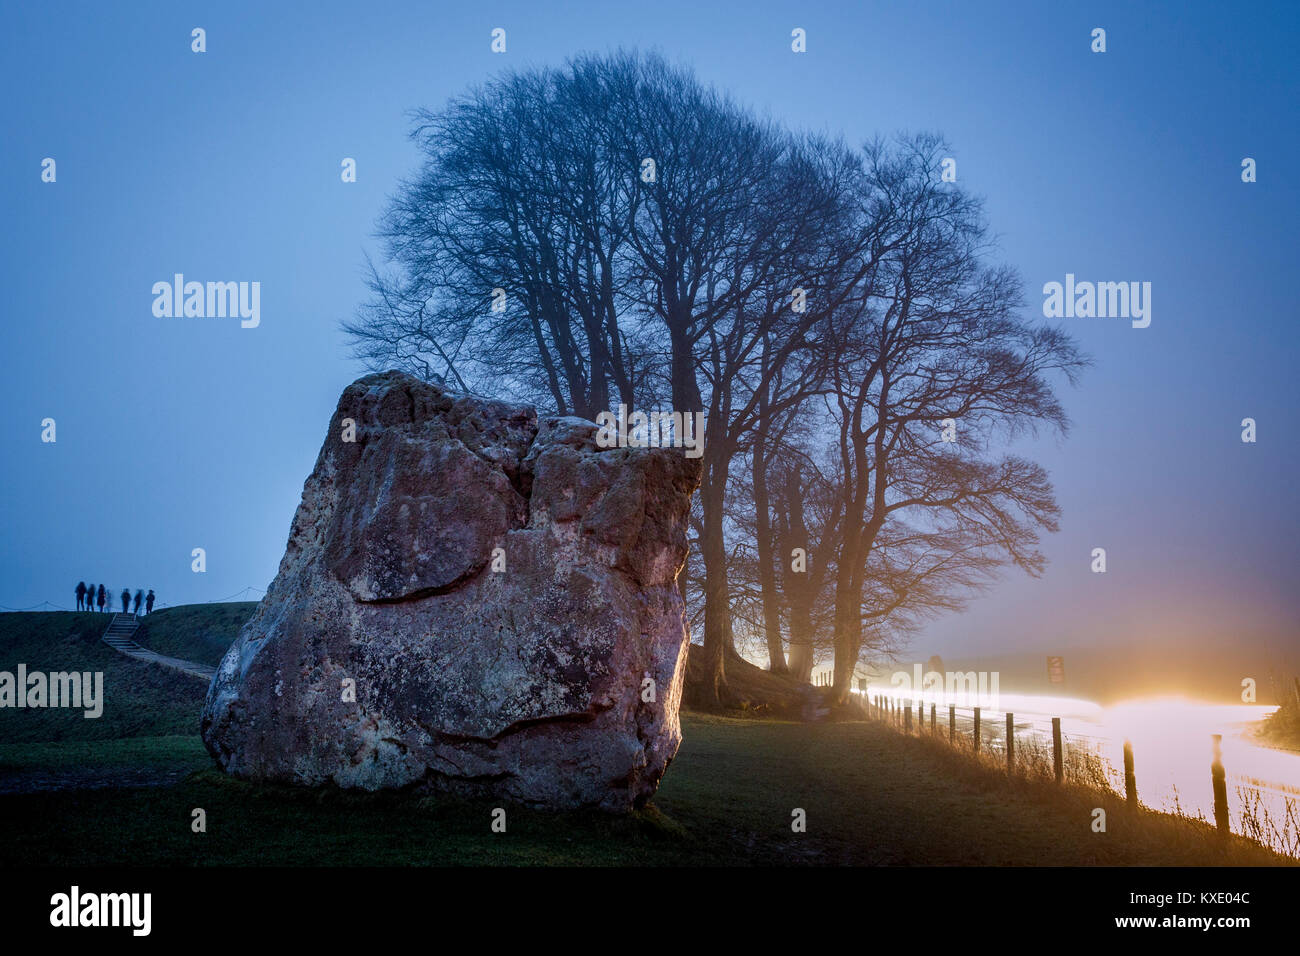 People gather in the mist and grey overcast weather at Avebury stone circle to watch the rising of the sun on the day of the winter solstice, the shortest day of the year. Stock Photo